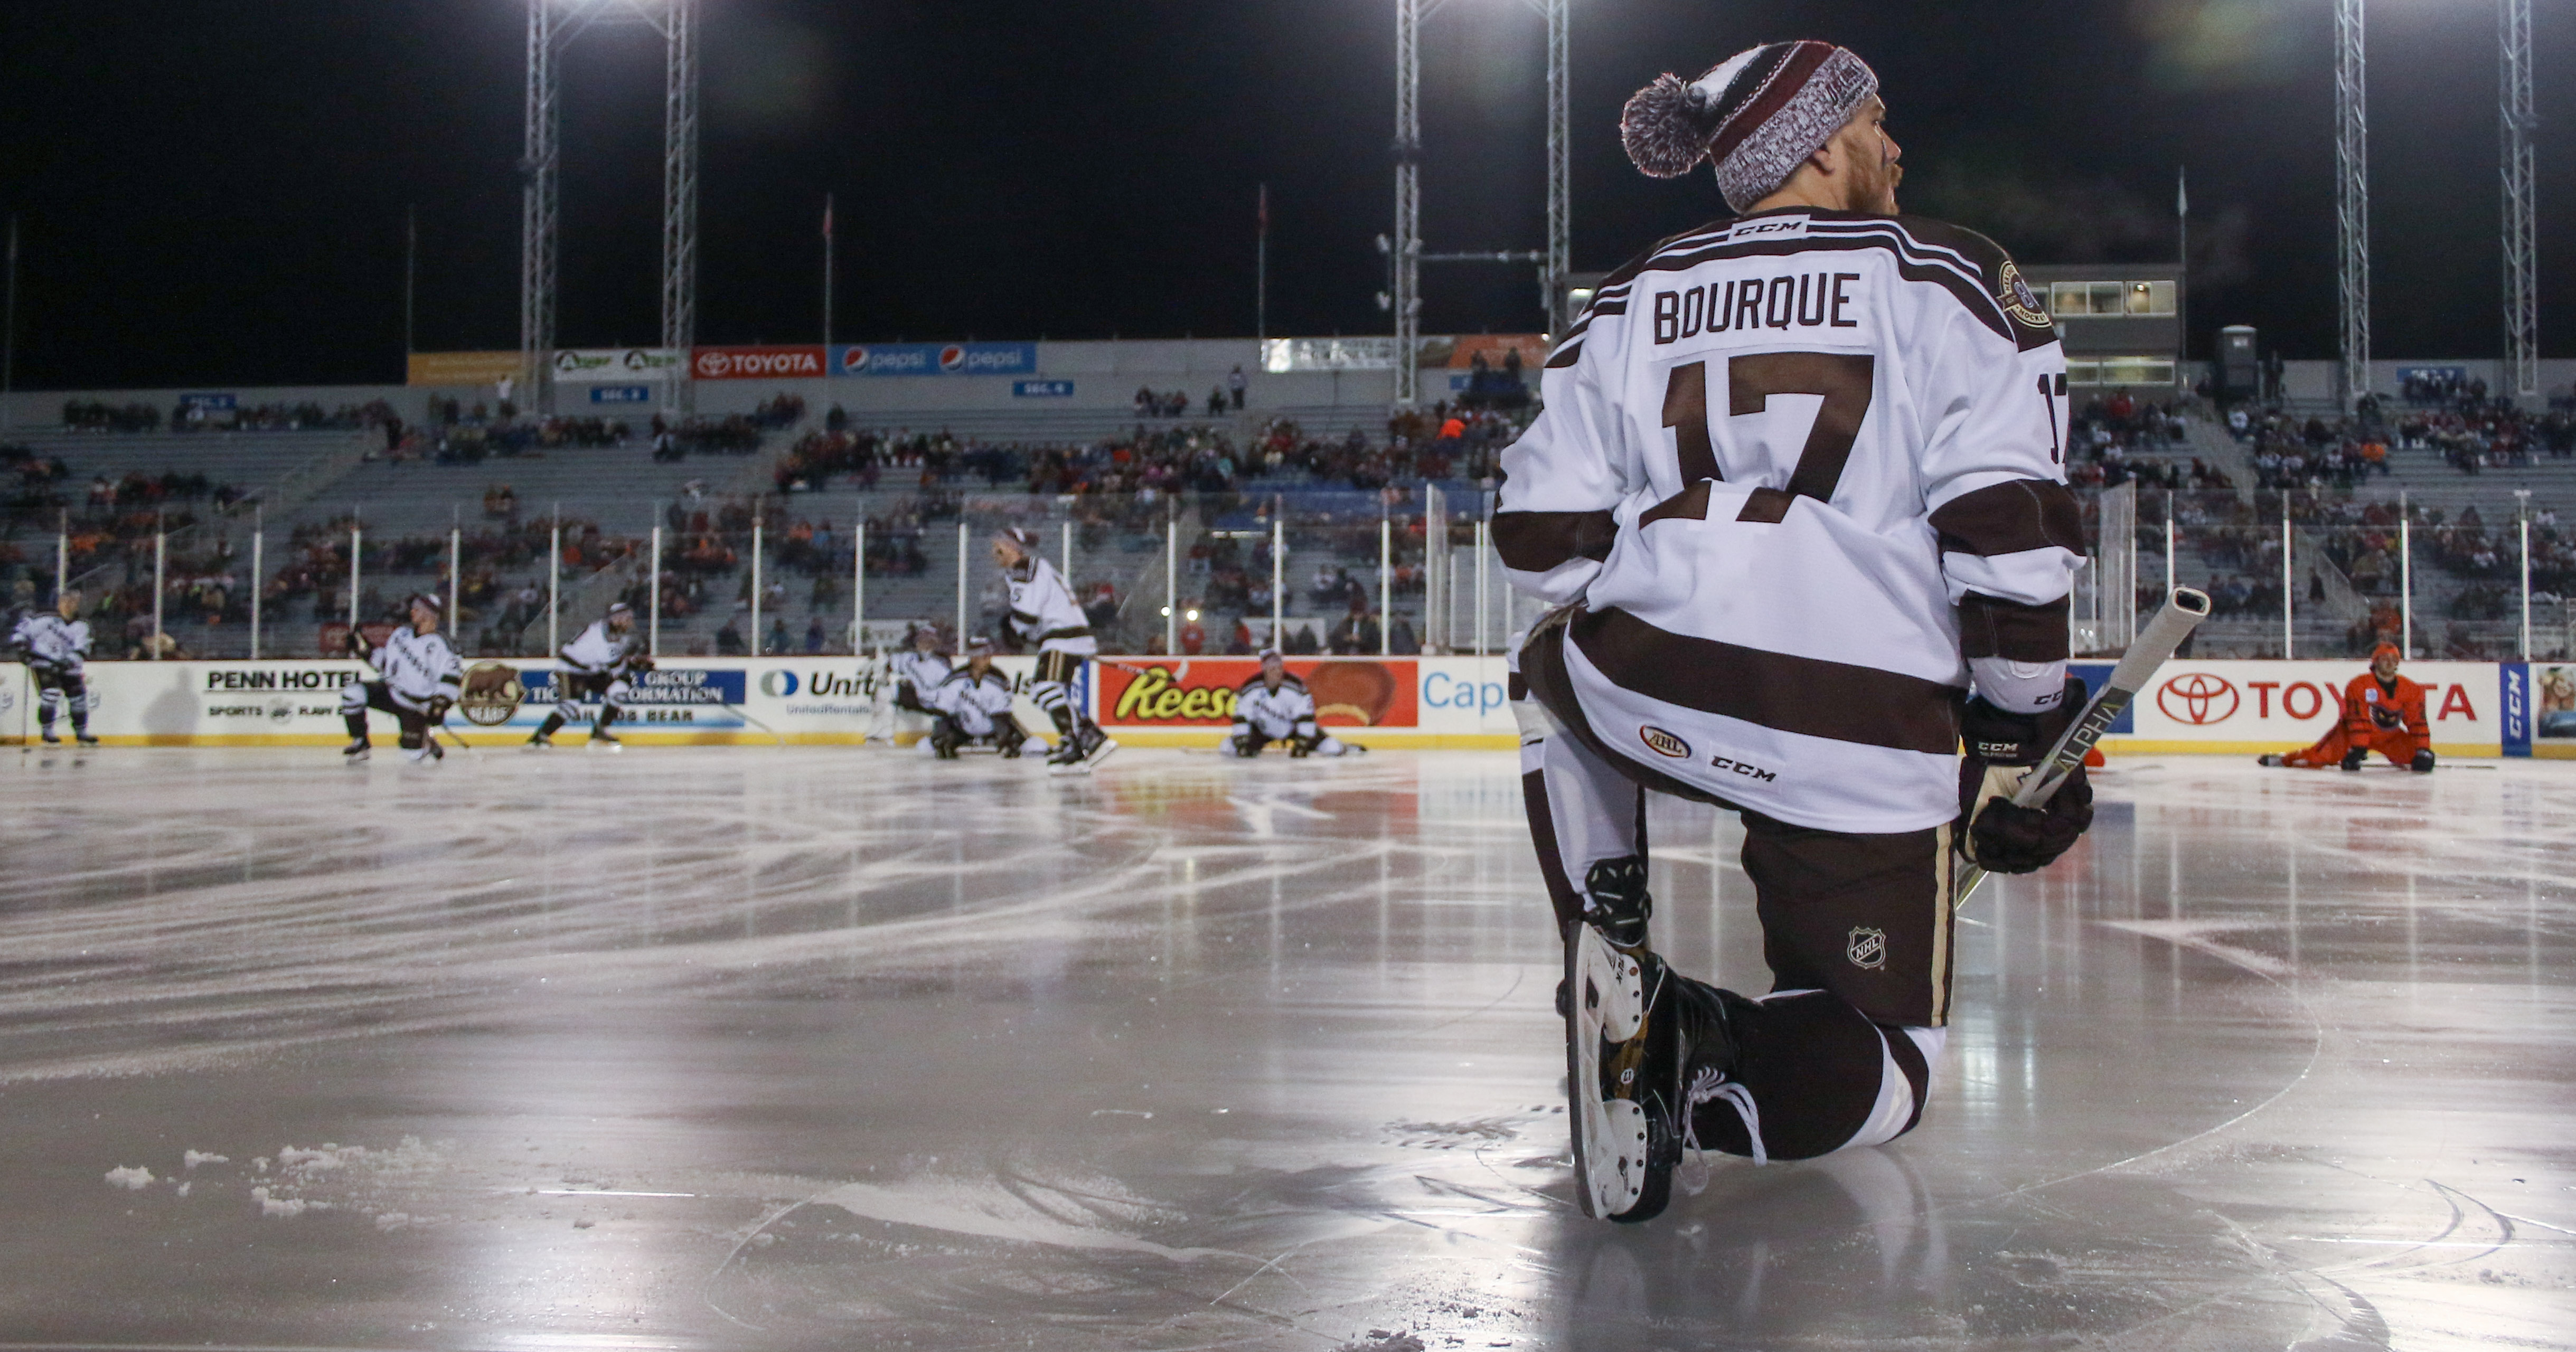 Chris Bourque Not Be Returning To Hershey In 2018-19